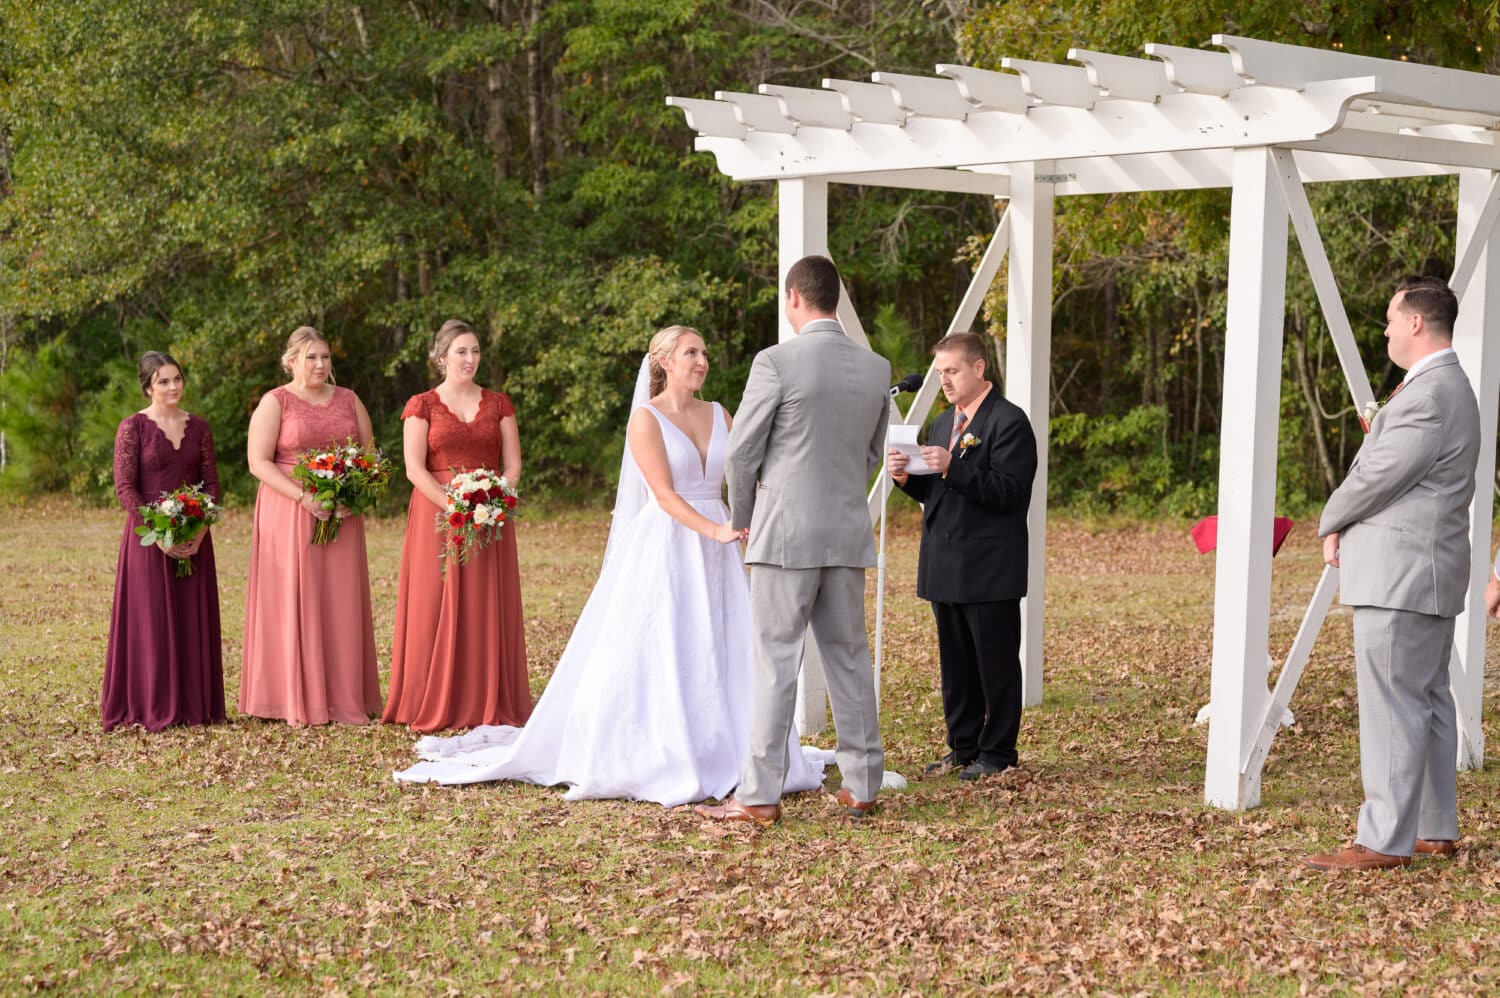 Ceremony under the oak - The Blessed Barn